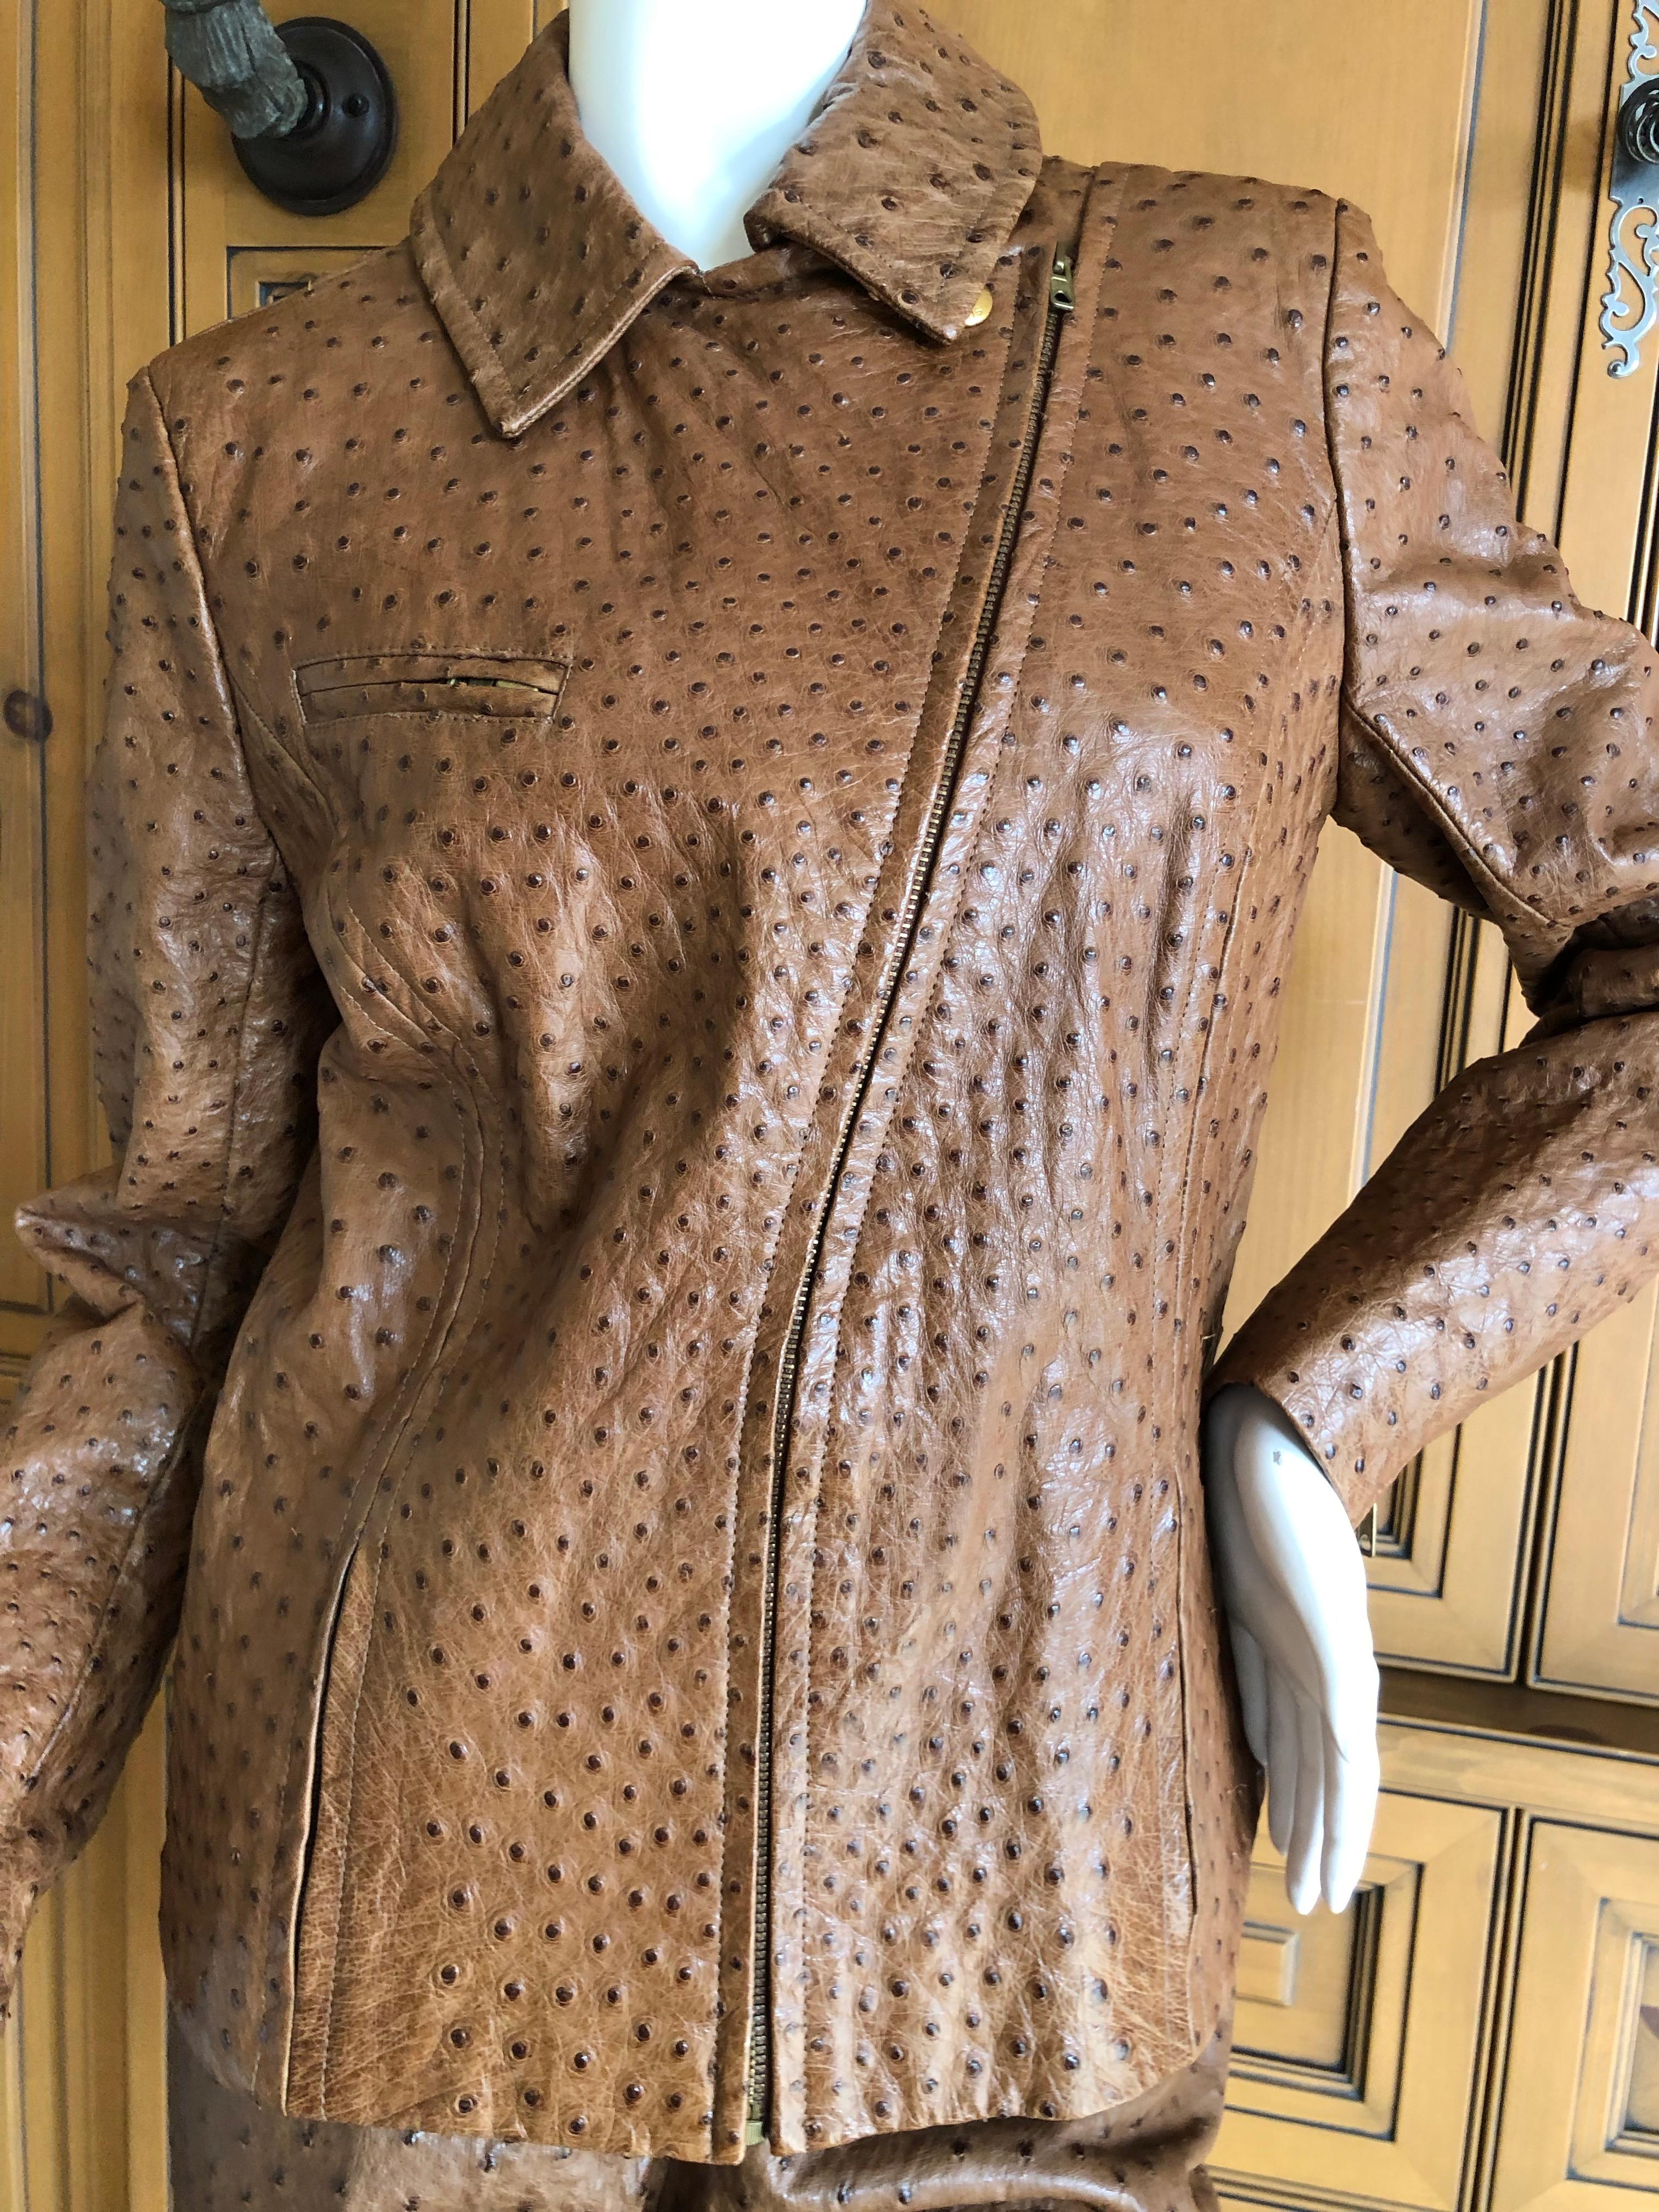 Hermes Paris Extraordinary Vintage Ostrich Motorcycle Suit Moto Jacket and Pants In Excellent Condition For Sale In Cloverdale, CA